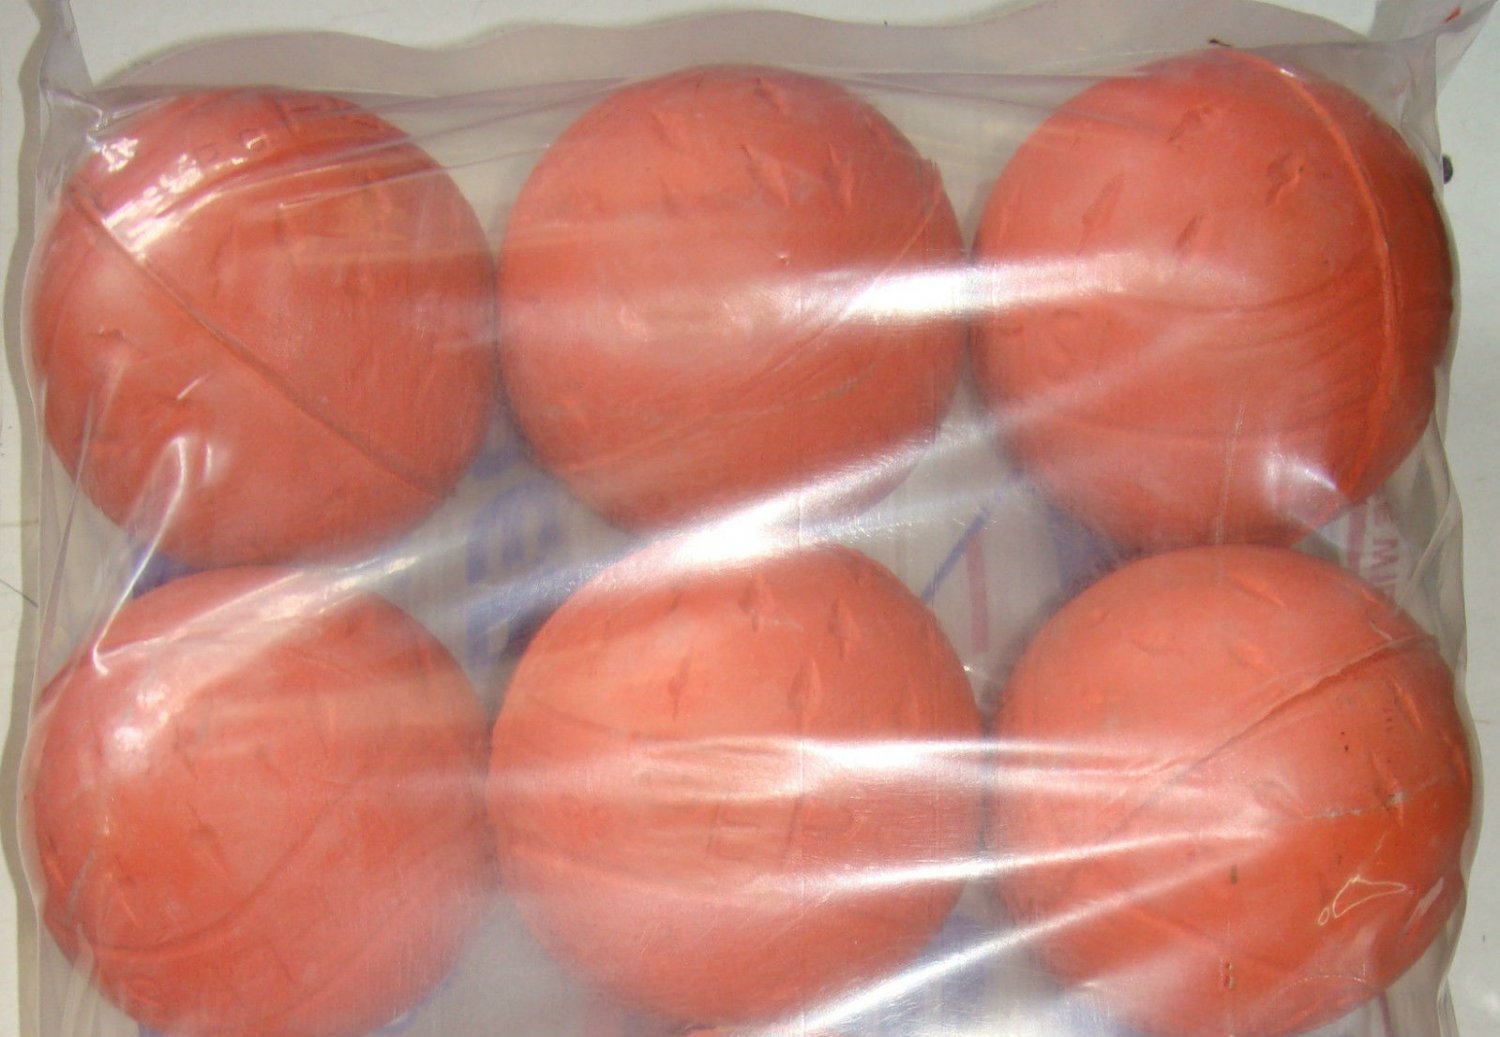 6 Indian Rubber Cricket Ball Rubber Ball for Cricket Indian Rubber Ball 1/2Doz